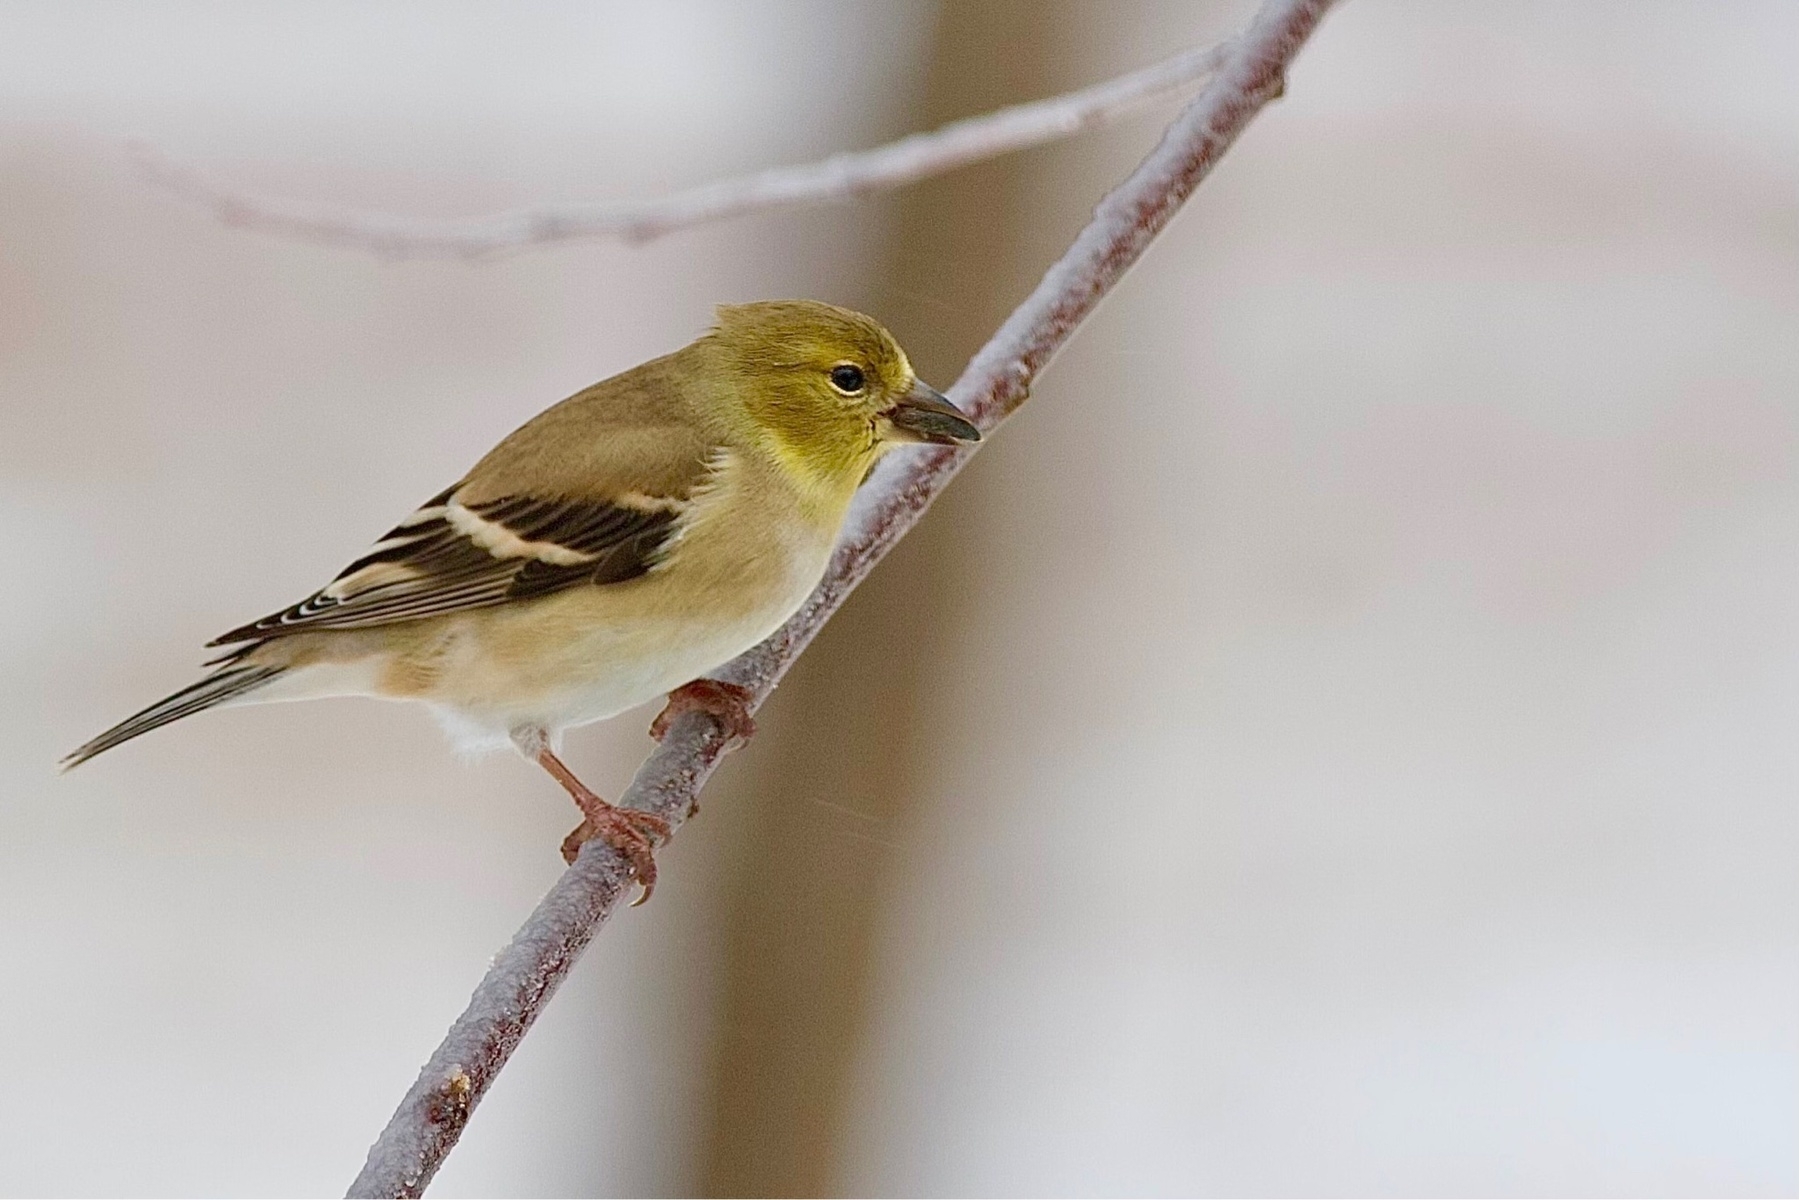 A small yellow bird is perched on a branch, holding a black sunflower seed in it's beak.